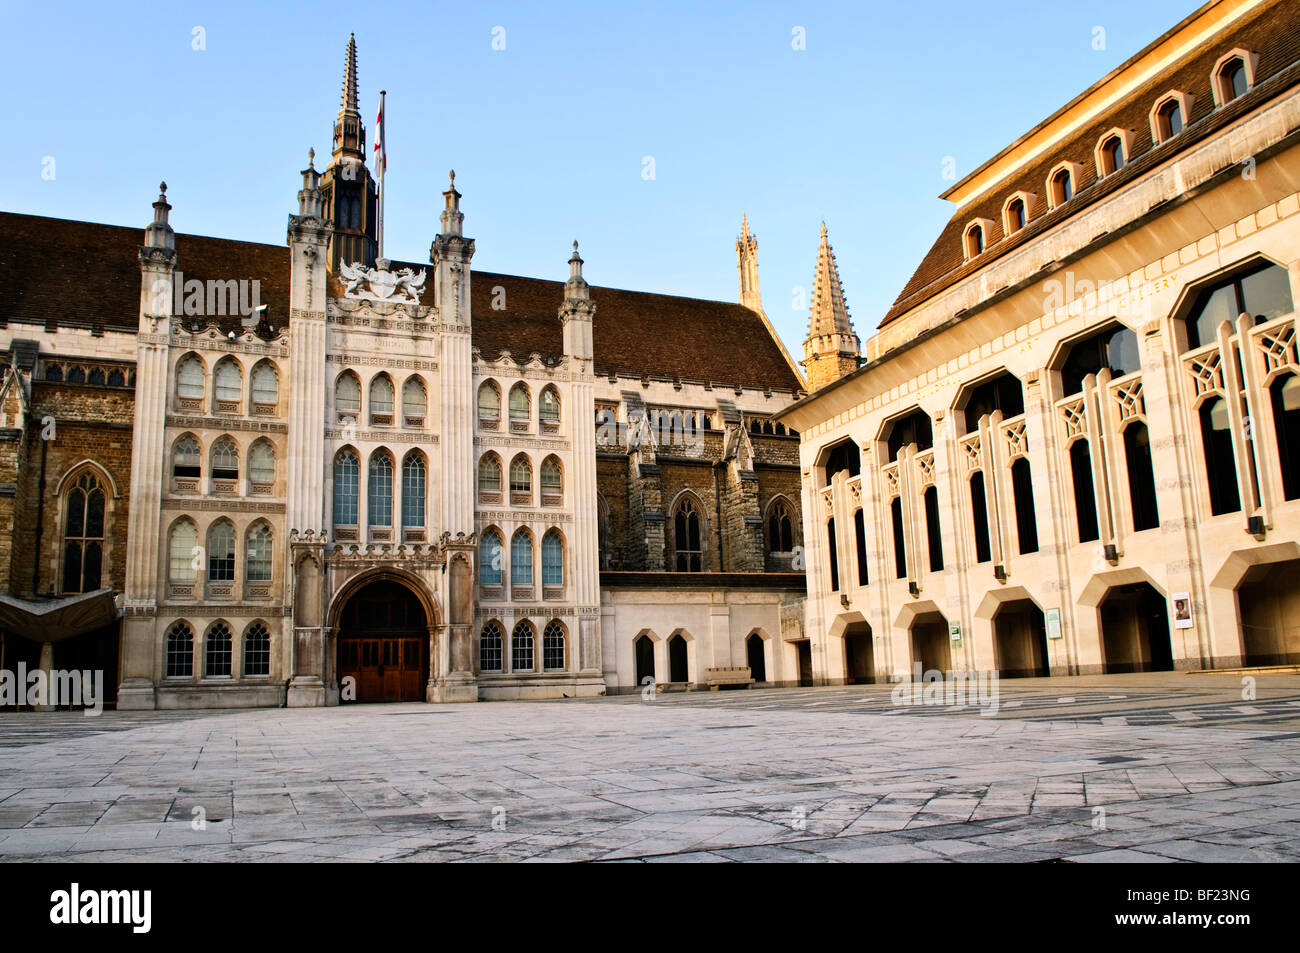 Guildhall building and Art Gallery in City of London Stock Photo